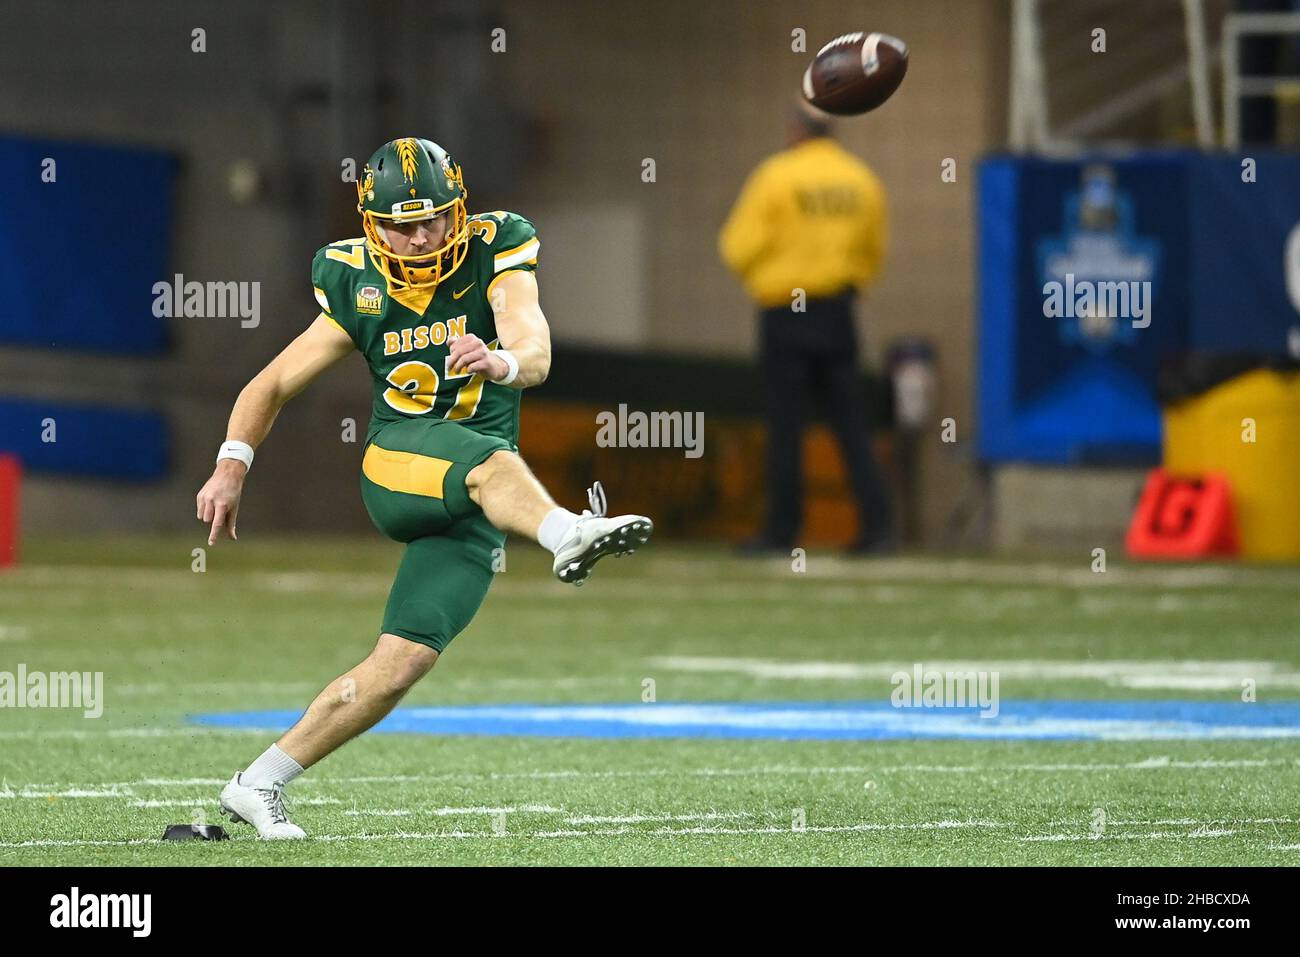 North Dakota State Bison place kicker Jake Reinholz (37) kicks off during a NCAA FCS football semi-final game between the James Madison University Dukes and the North Dakota State University Bison at the Fargo Dome, Fargo, ND on Friday, December 17, 2021. North Dakota State won 20-14. Russell Hons/CSM Stock Photo